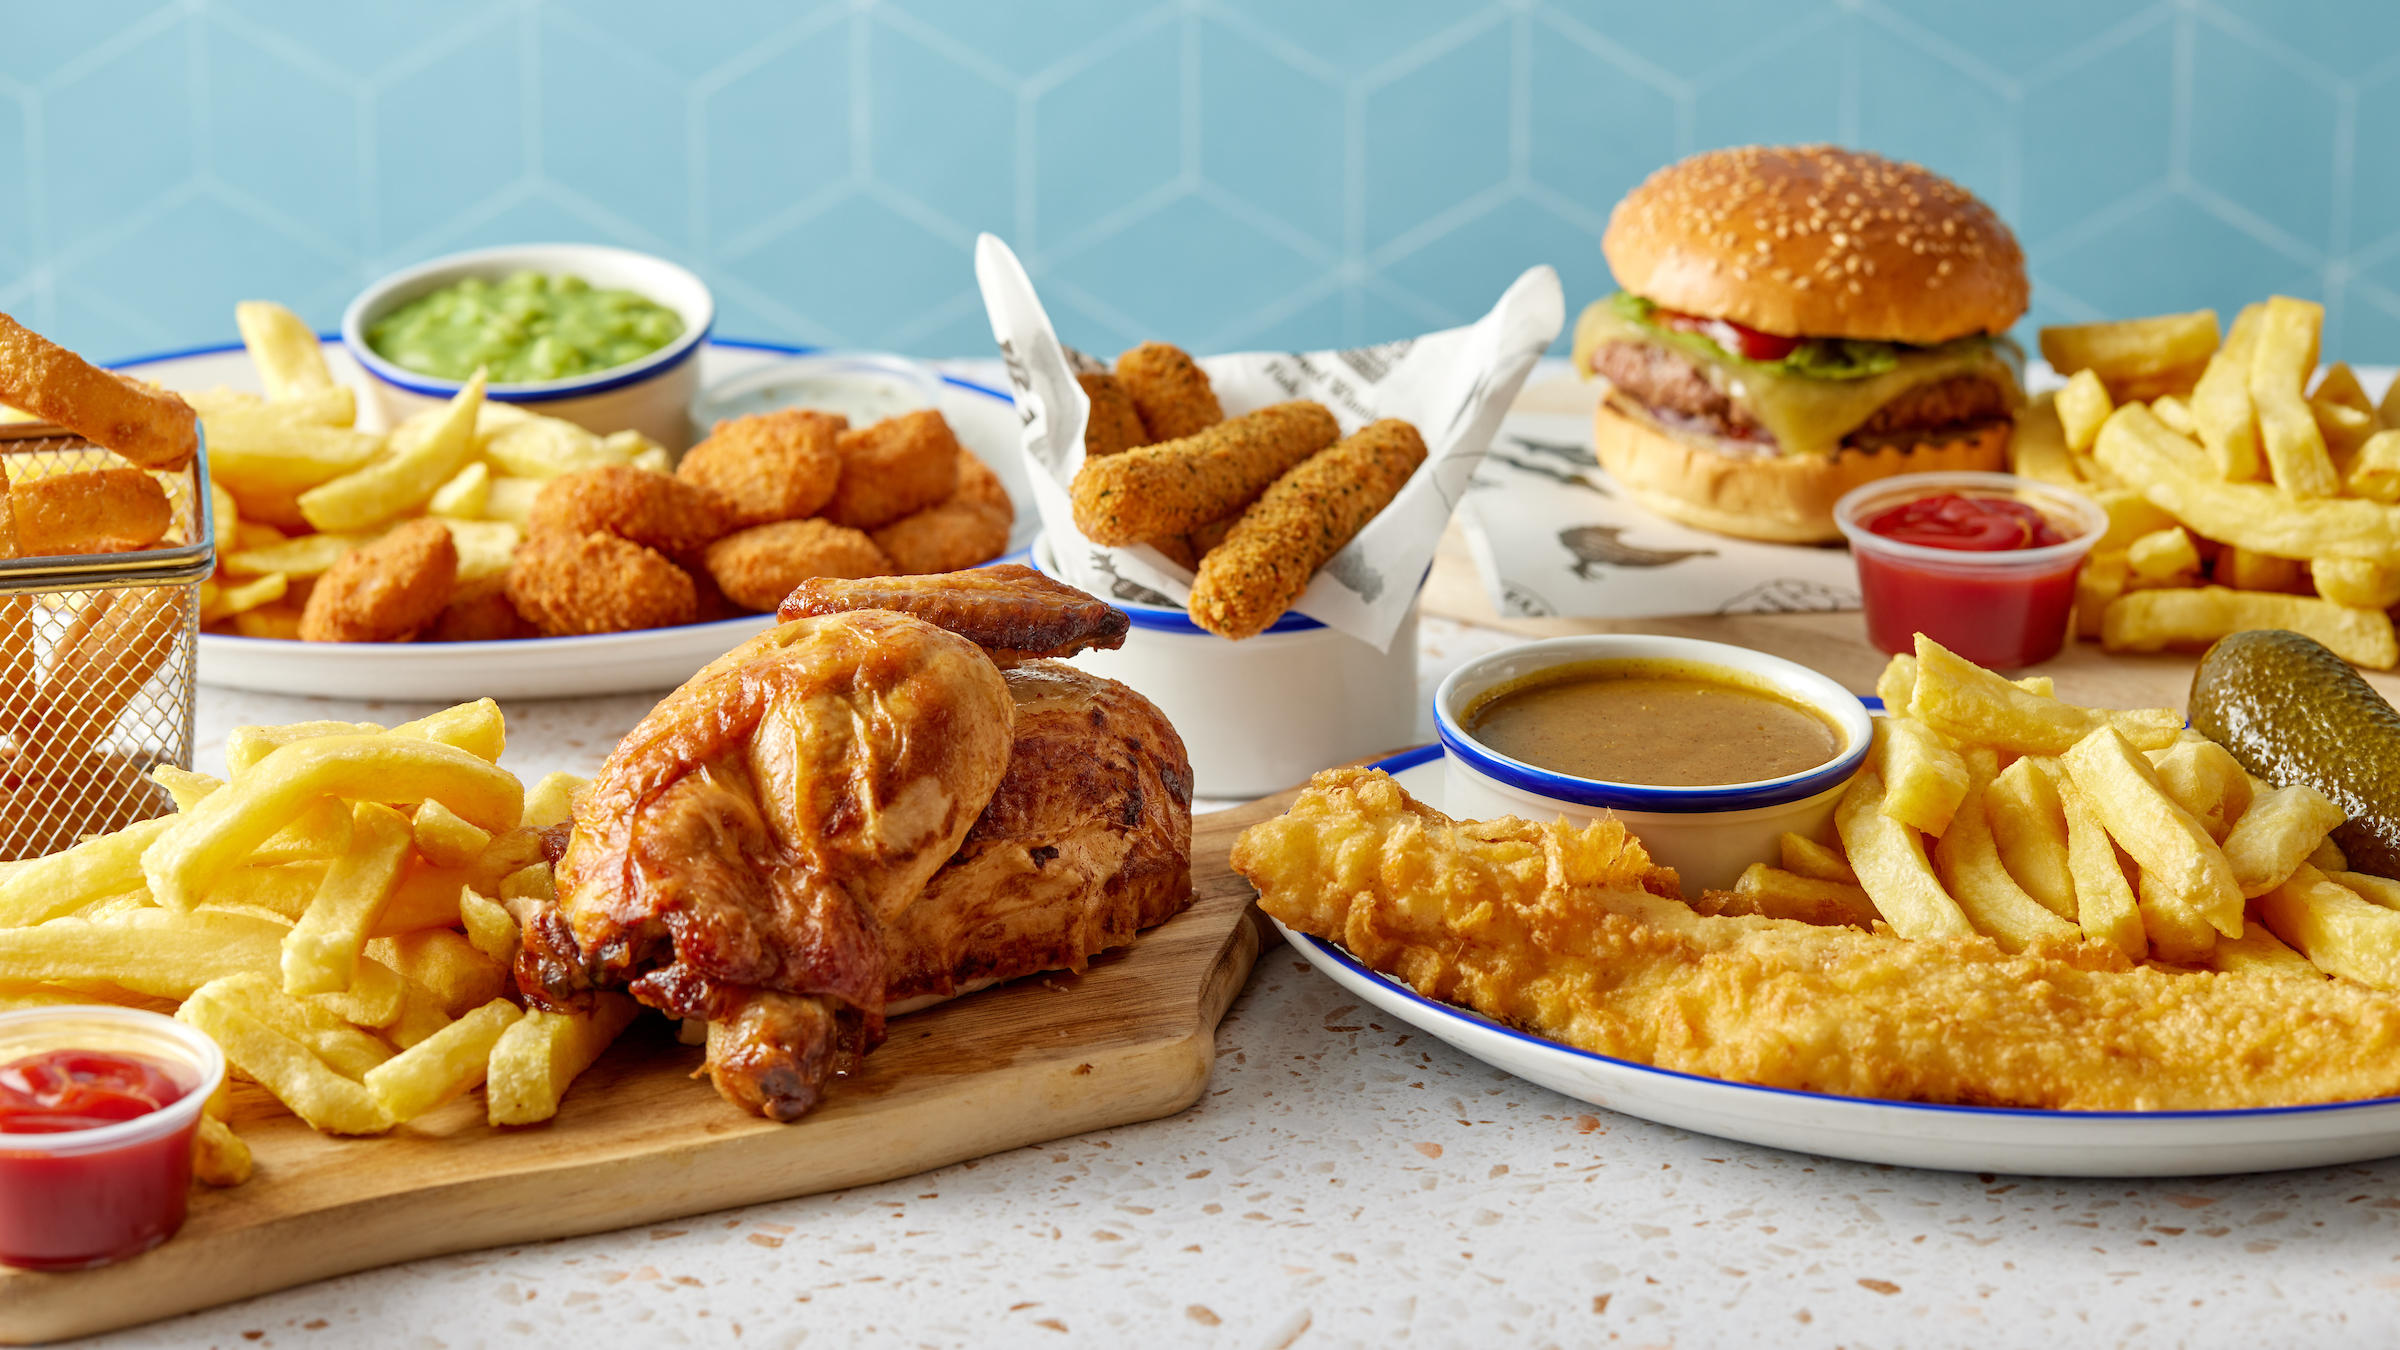 Enjoy fishnchickn your way! Order click & collect through our simple online ordering website, or ord fishnchickn The Knares Basildon 01268 545487